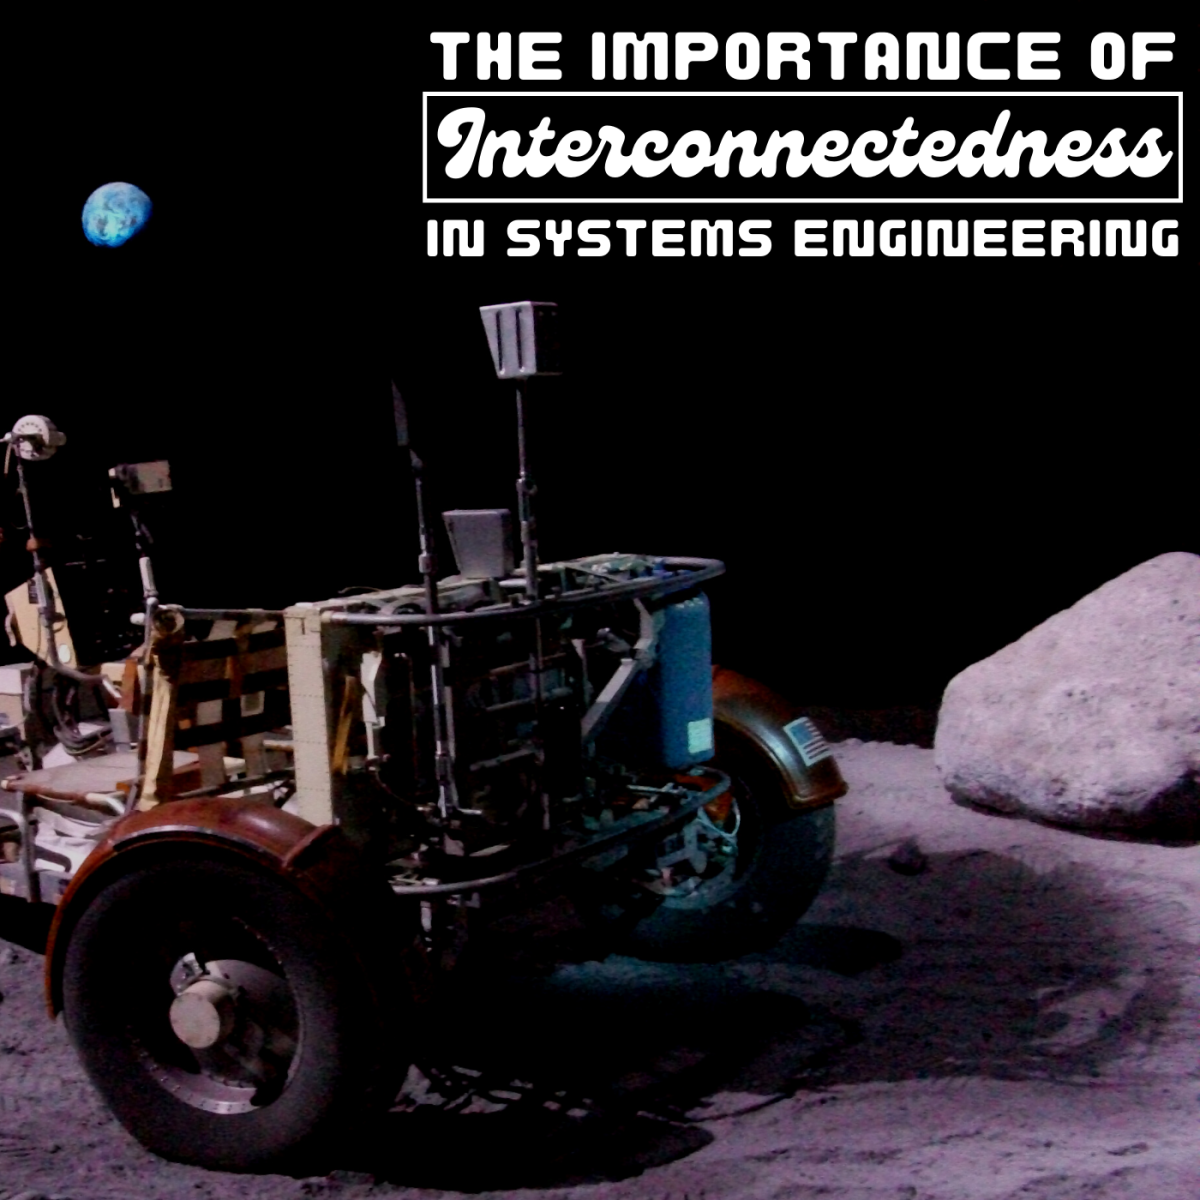 In a complex piece of technology like a moon rover, each component must work in complement with all of the others to ensure that the system as a whole does not break down. 